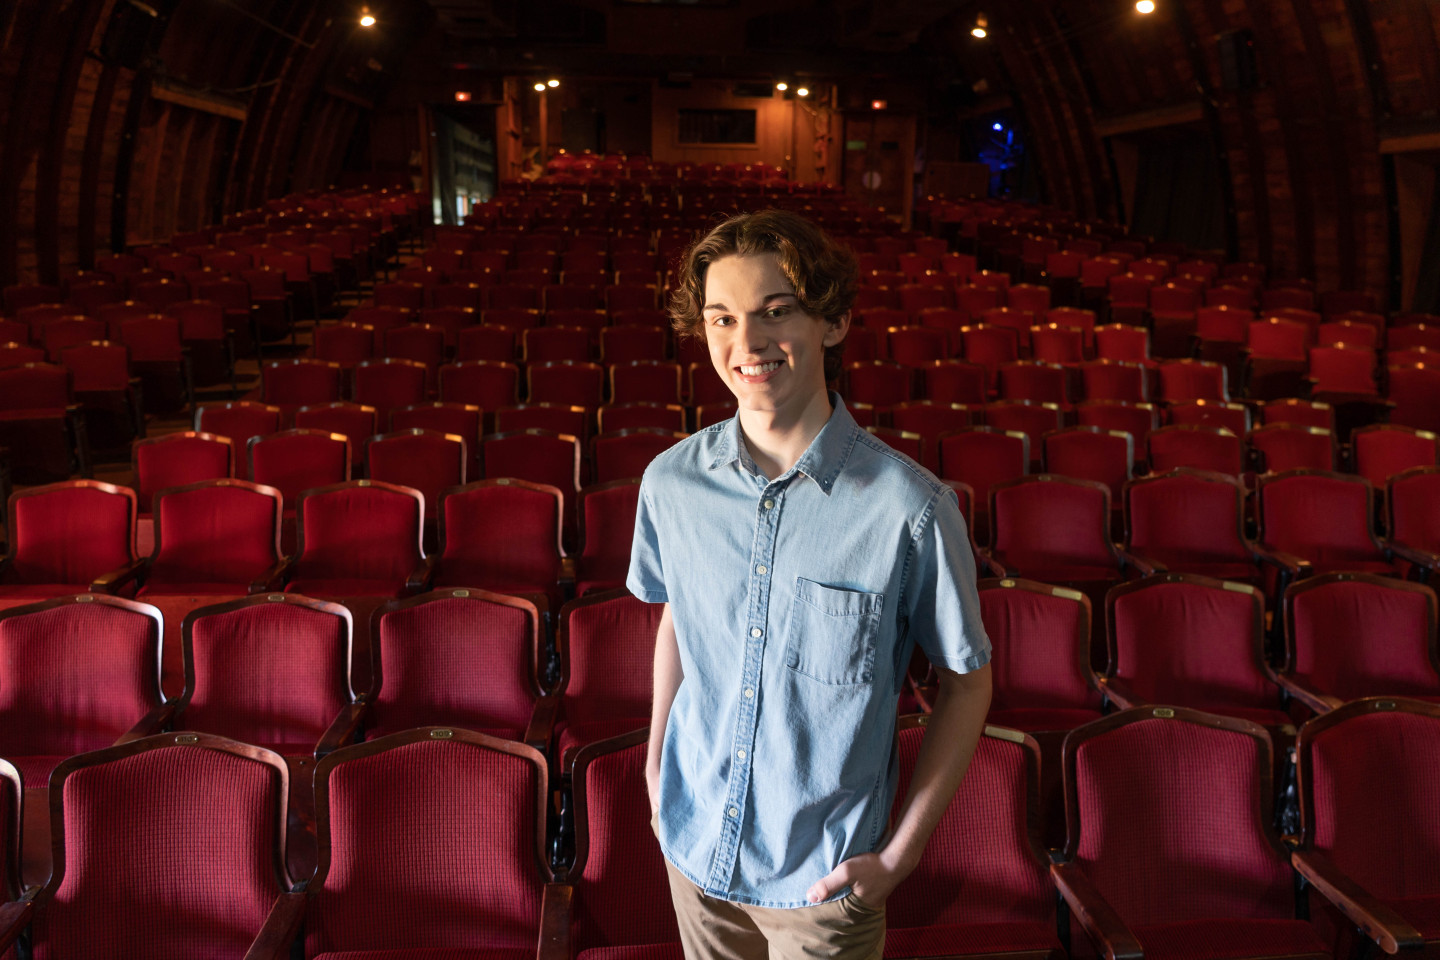 Jack Austin stands in an empty theatre filled with red folding chairs.